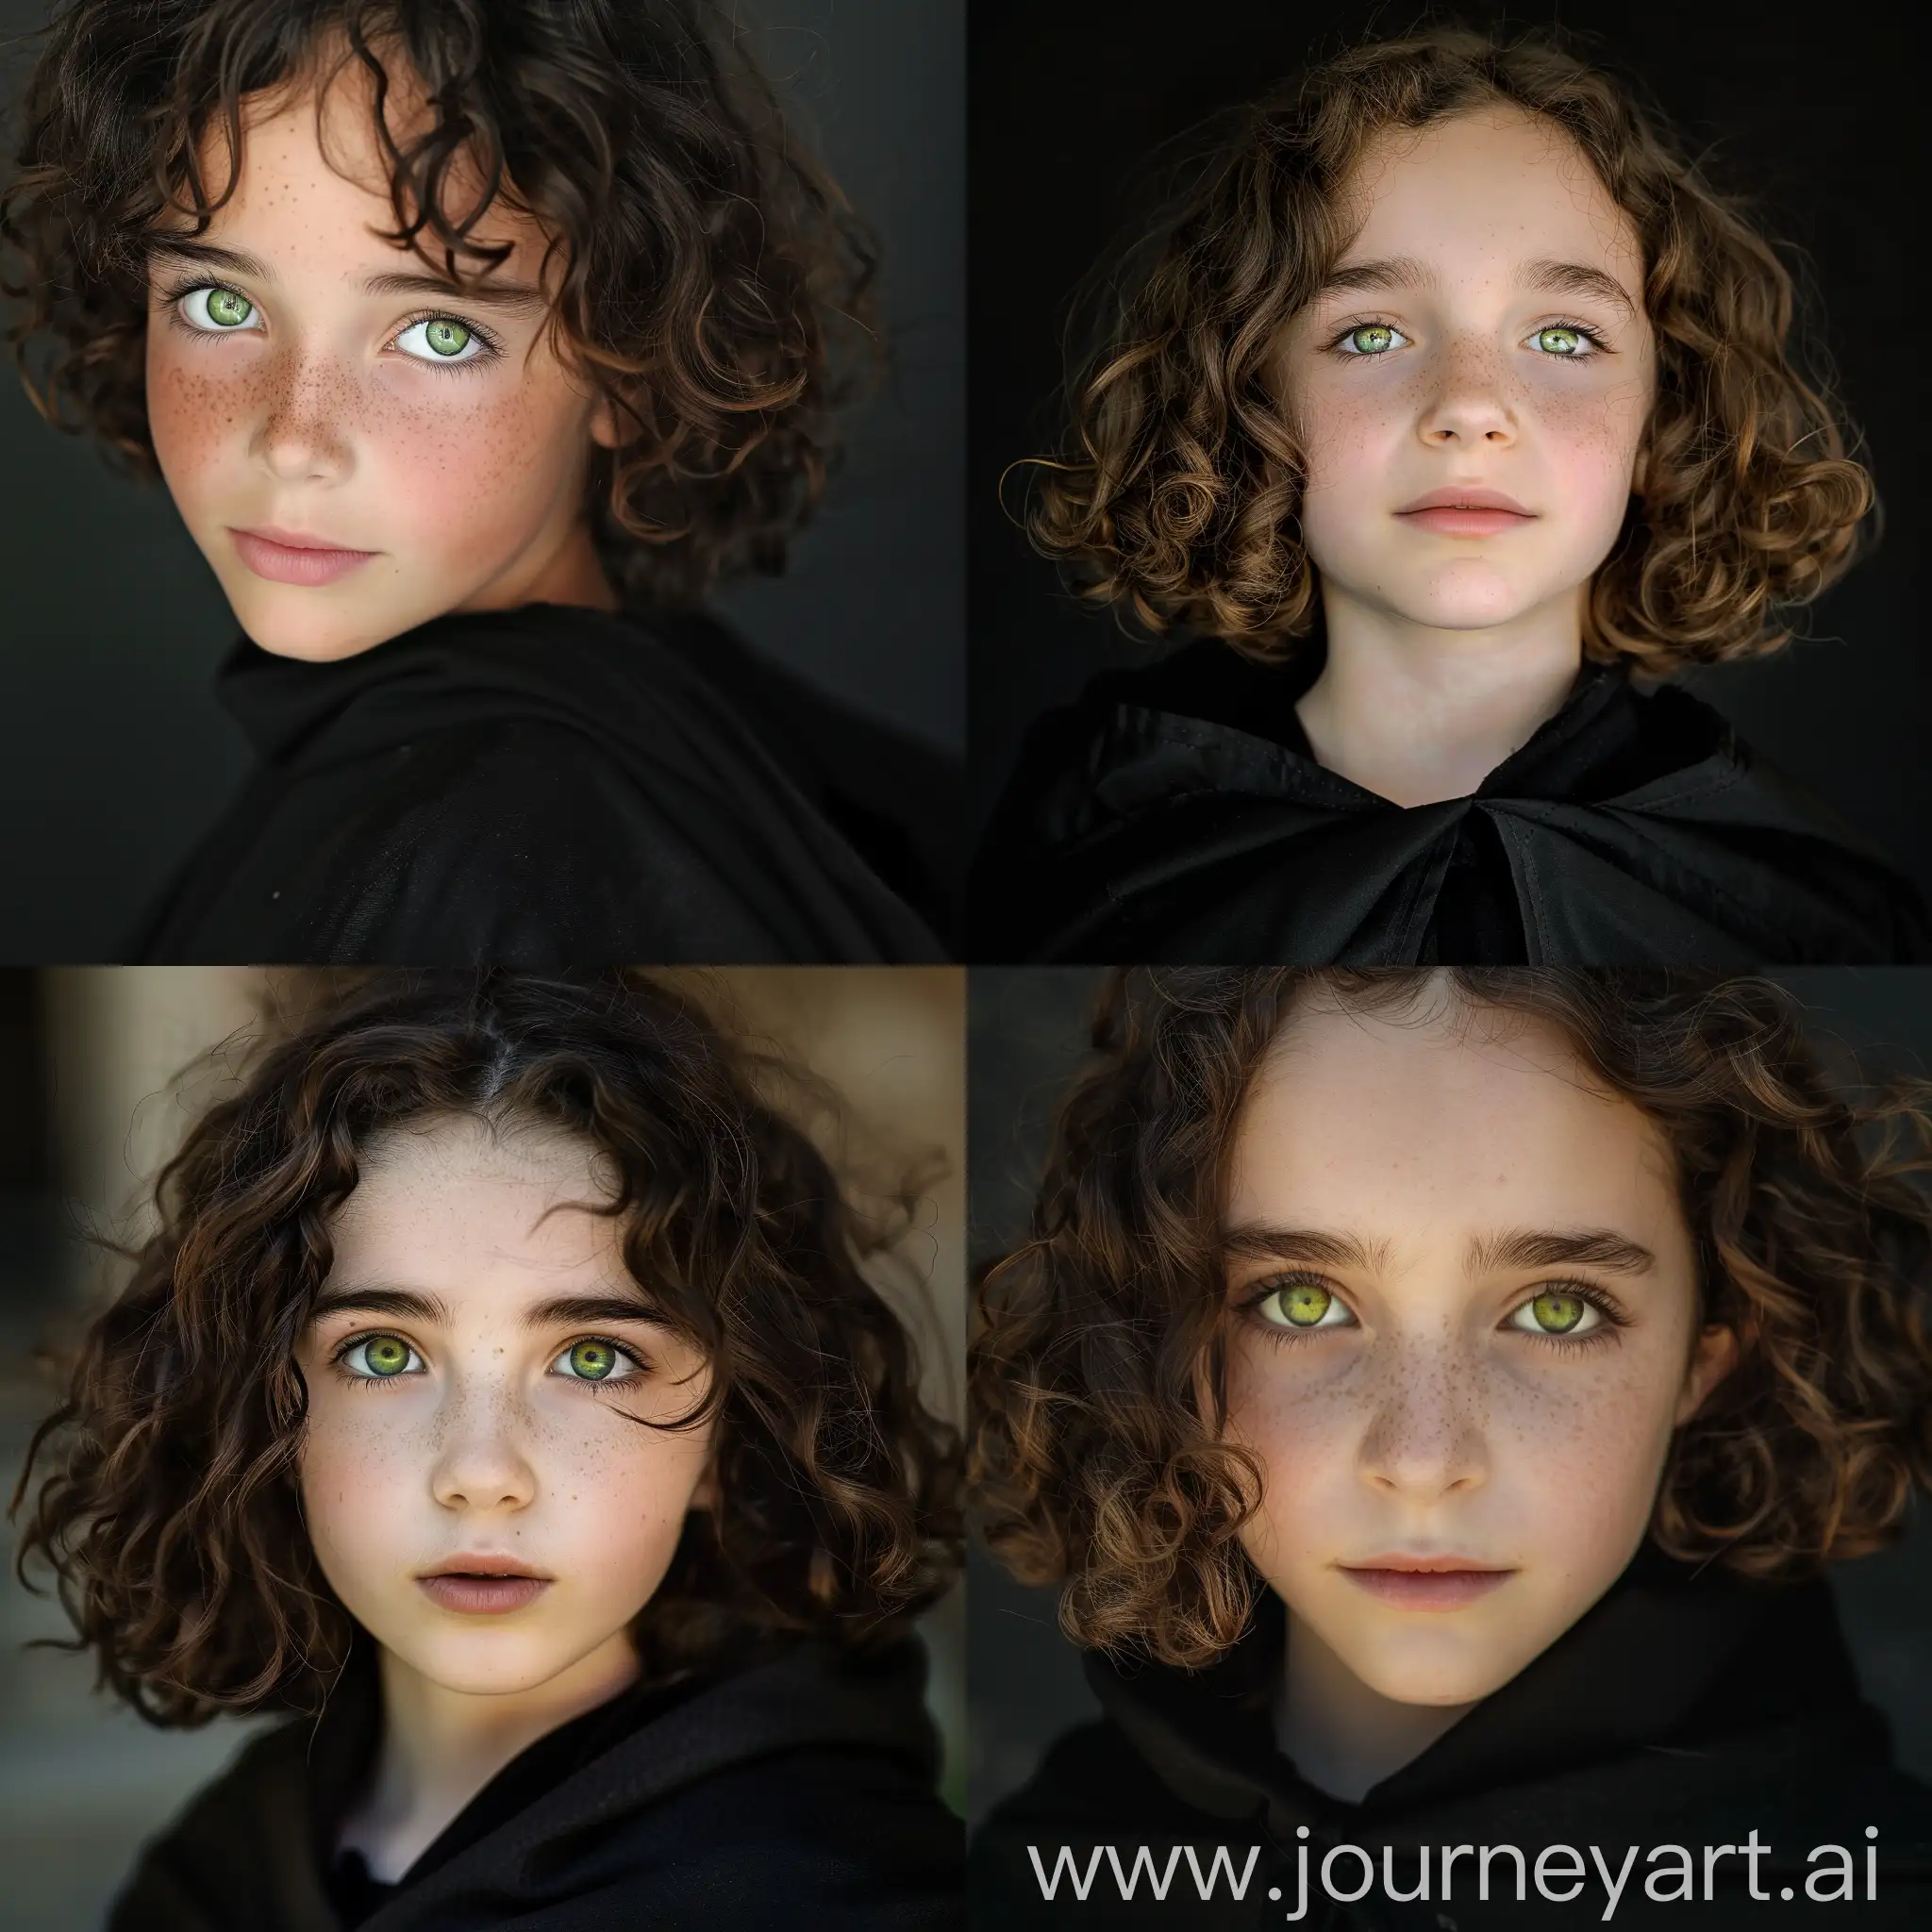 11YearOld-Student-of-a-Magic-School-with-Green-Eyes-and-Curly-Brown-Hair-in-Black-Cloak